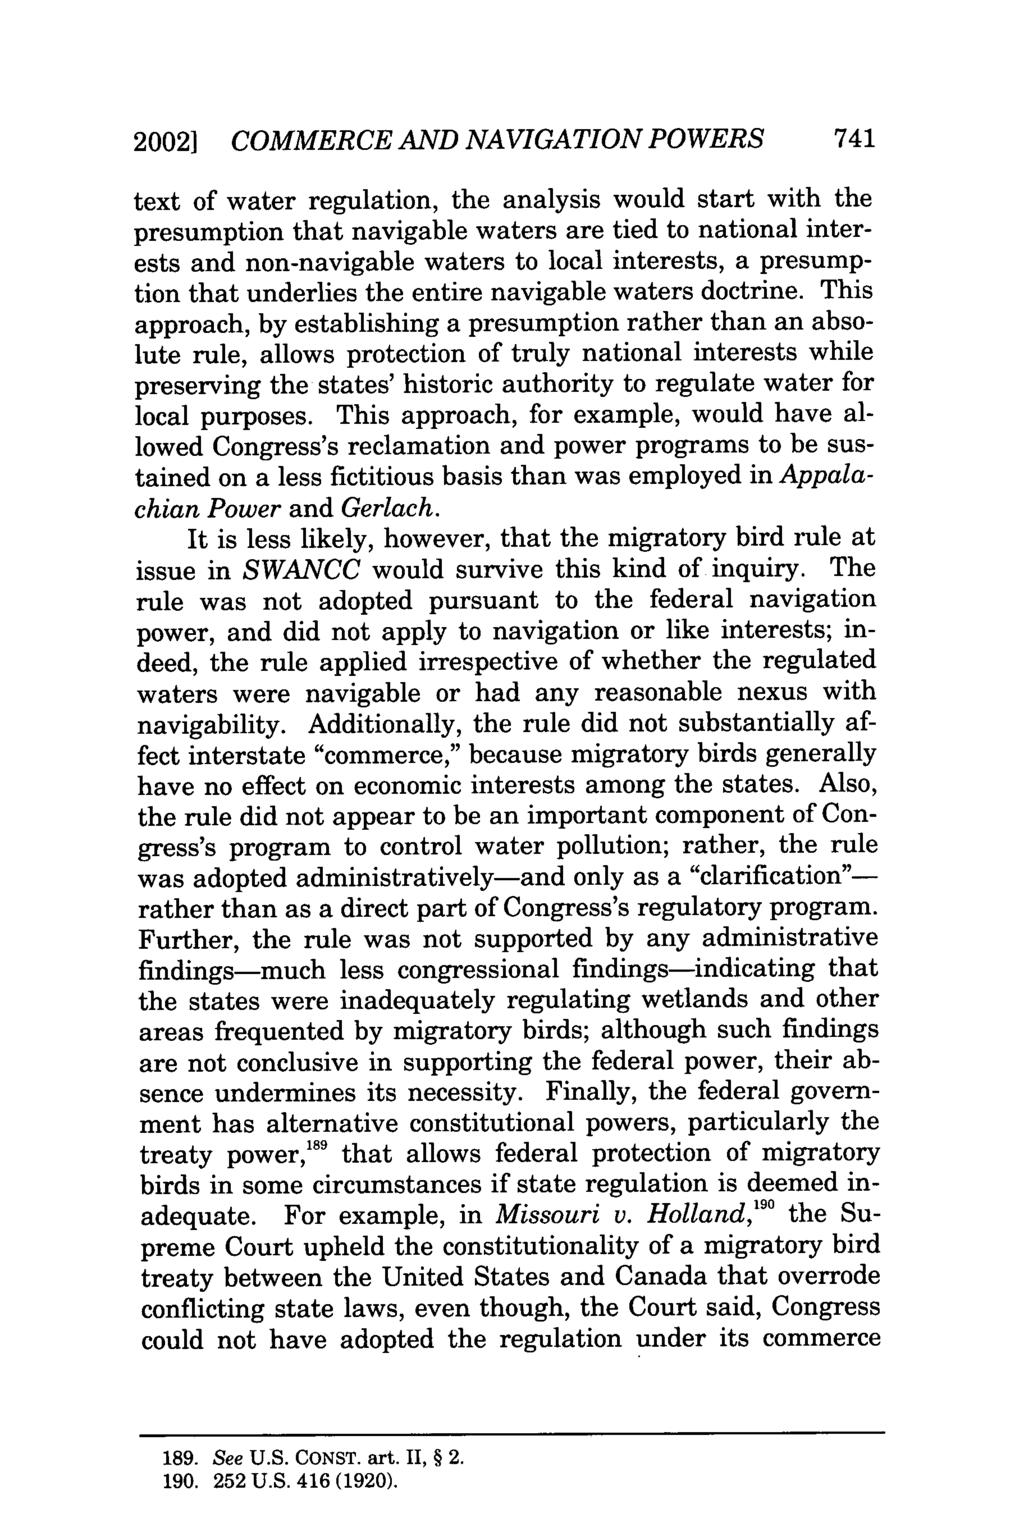 20021 COMMERCE AND NAVIGATION POWERS 741 text of water regulation, the analysis would start with the presumption that navigable waters are tied to national interests and non-navigable waters to local